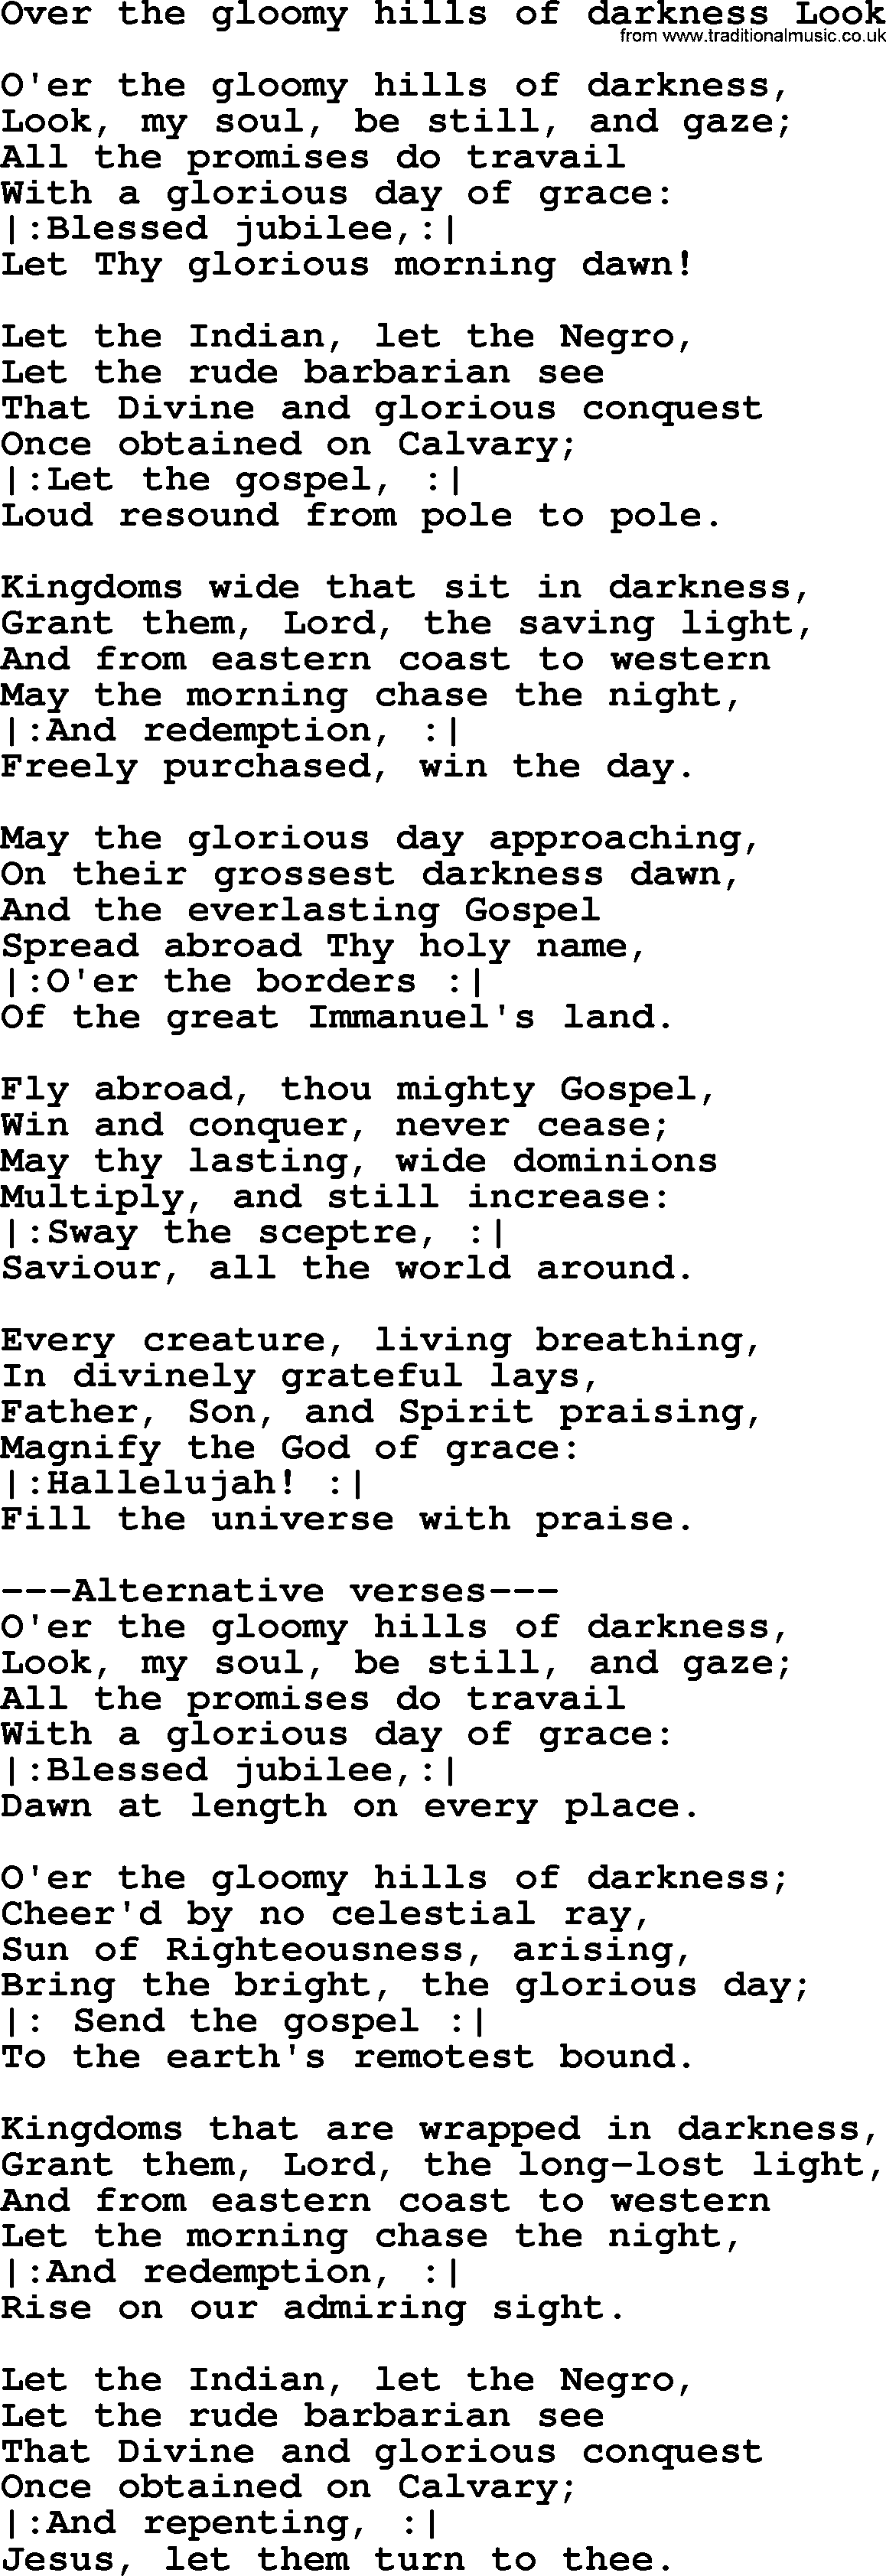 Sacred Songs and Solos complete, 1200 Hymns, title: Over The Gloomy Hills Of Darkness Look, lyrics and PDF